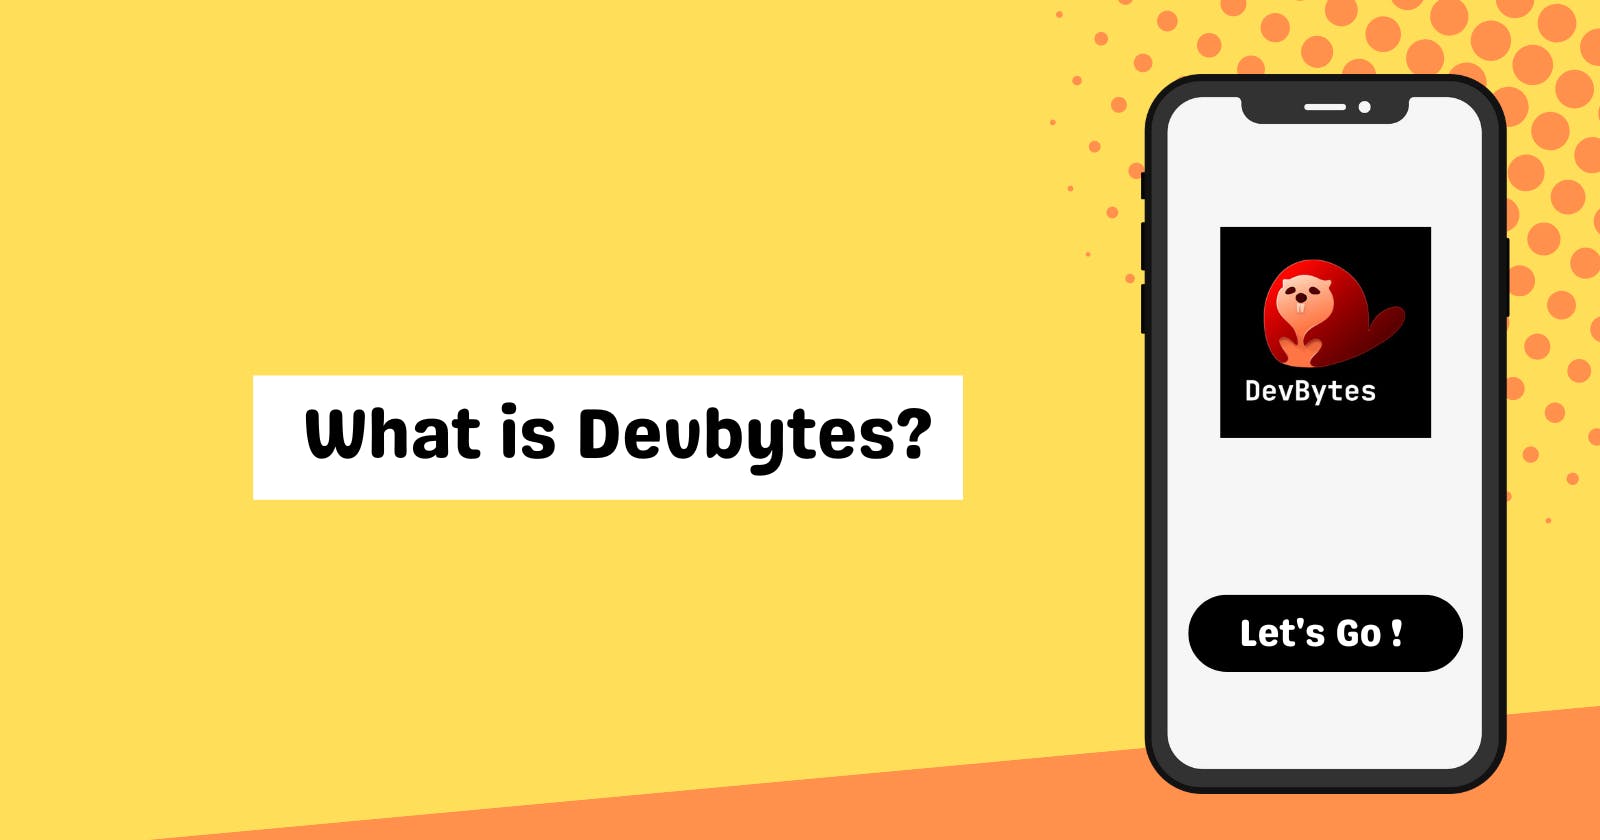 "Stay Up-to-Date with DevBytes: The Time-Saving App for Tech Professionals"